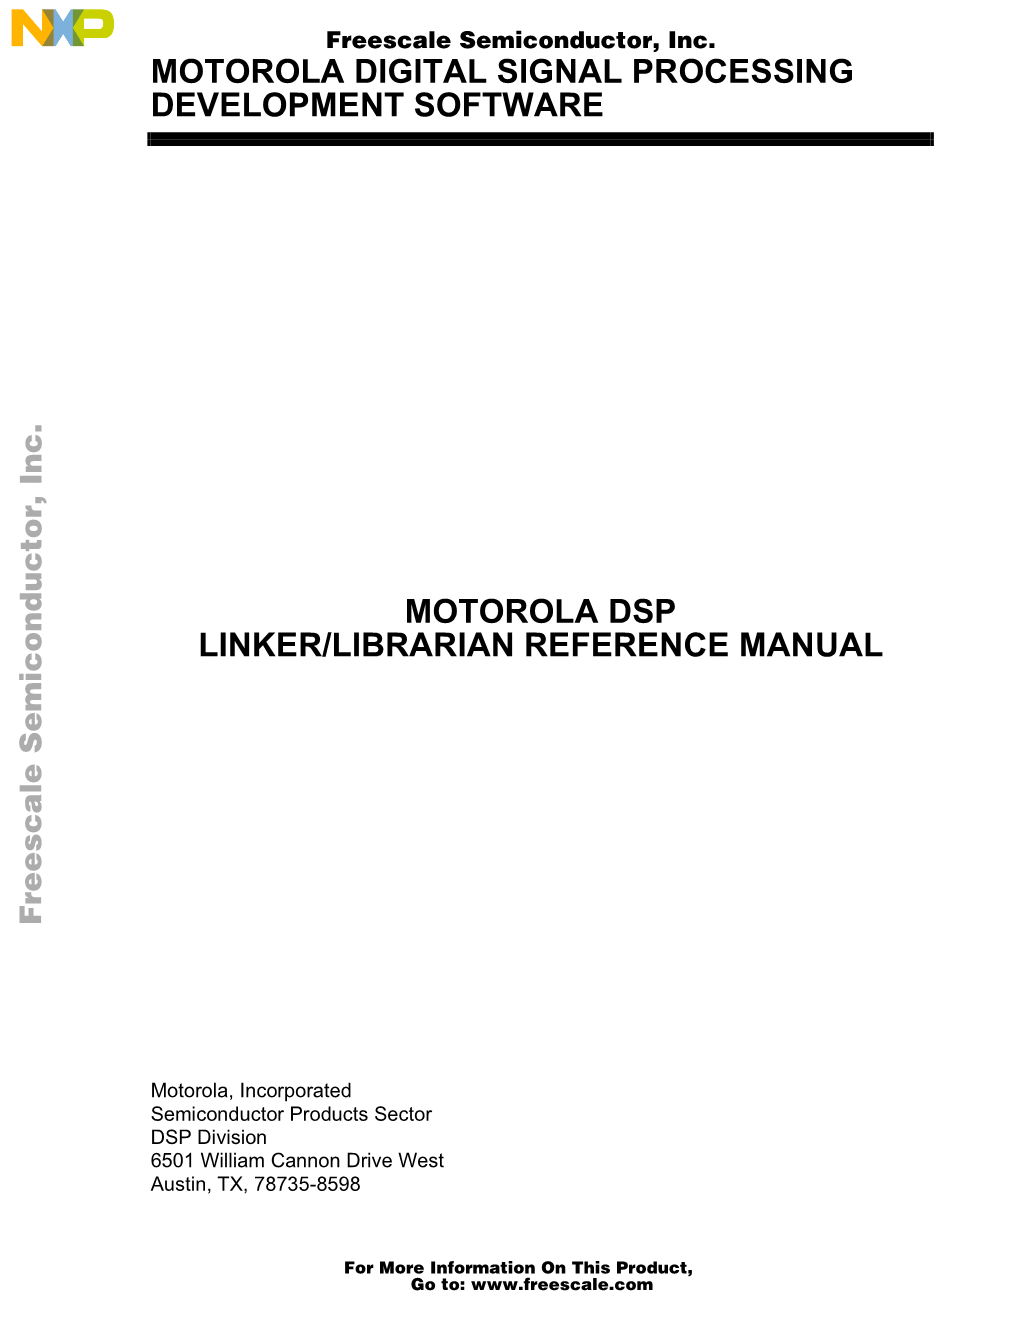 MOTOROLA DSP LINKER/LIBRARIAN REFERENCE MANUAL Iii for More Information on This Product, Go To: Freescale Semiconductor, Inc